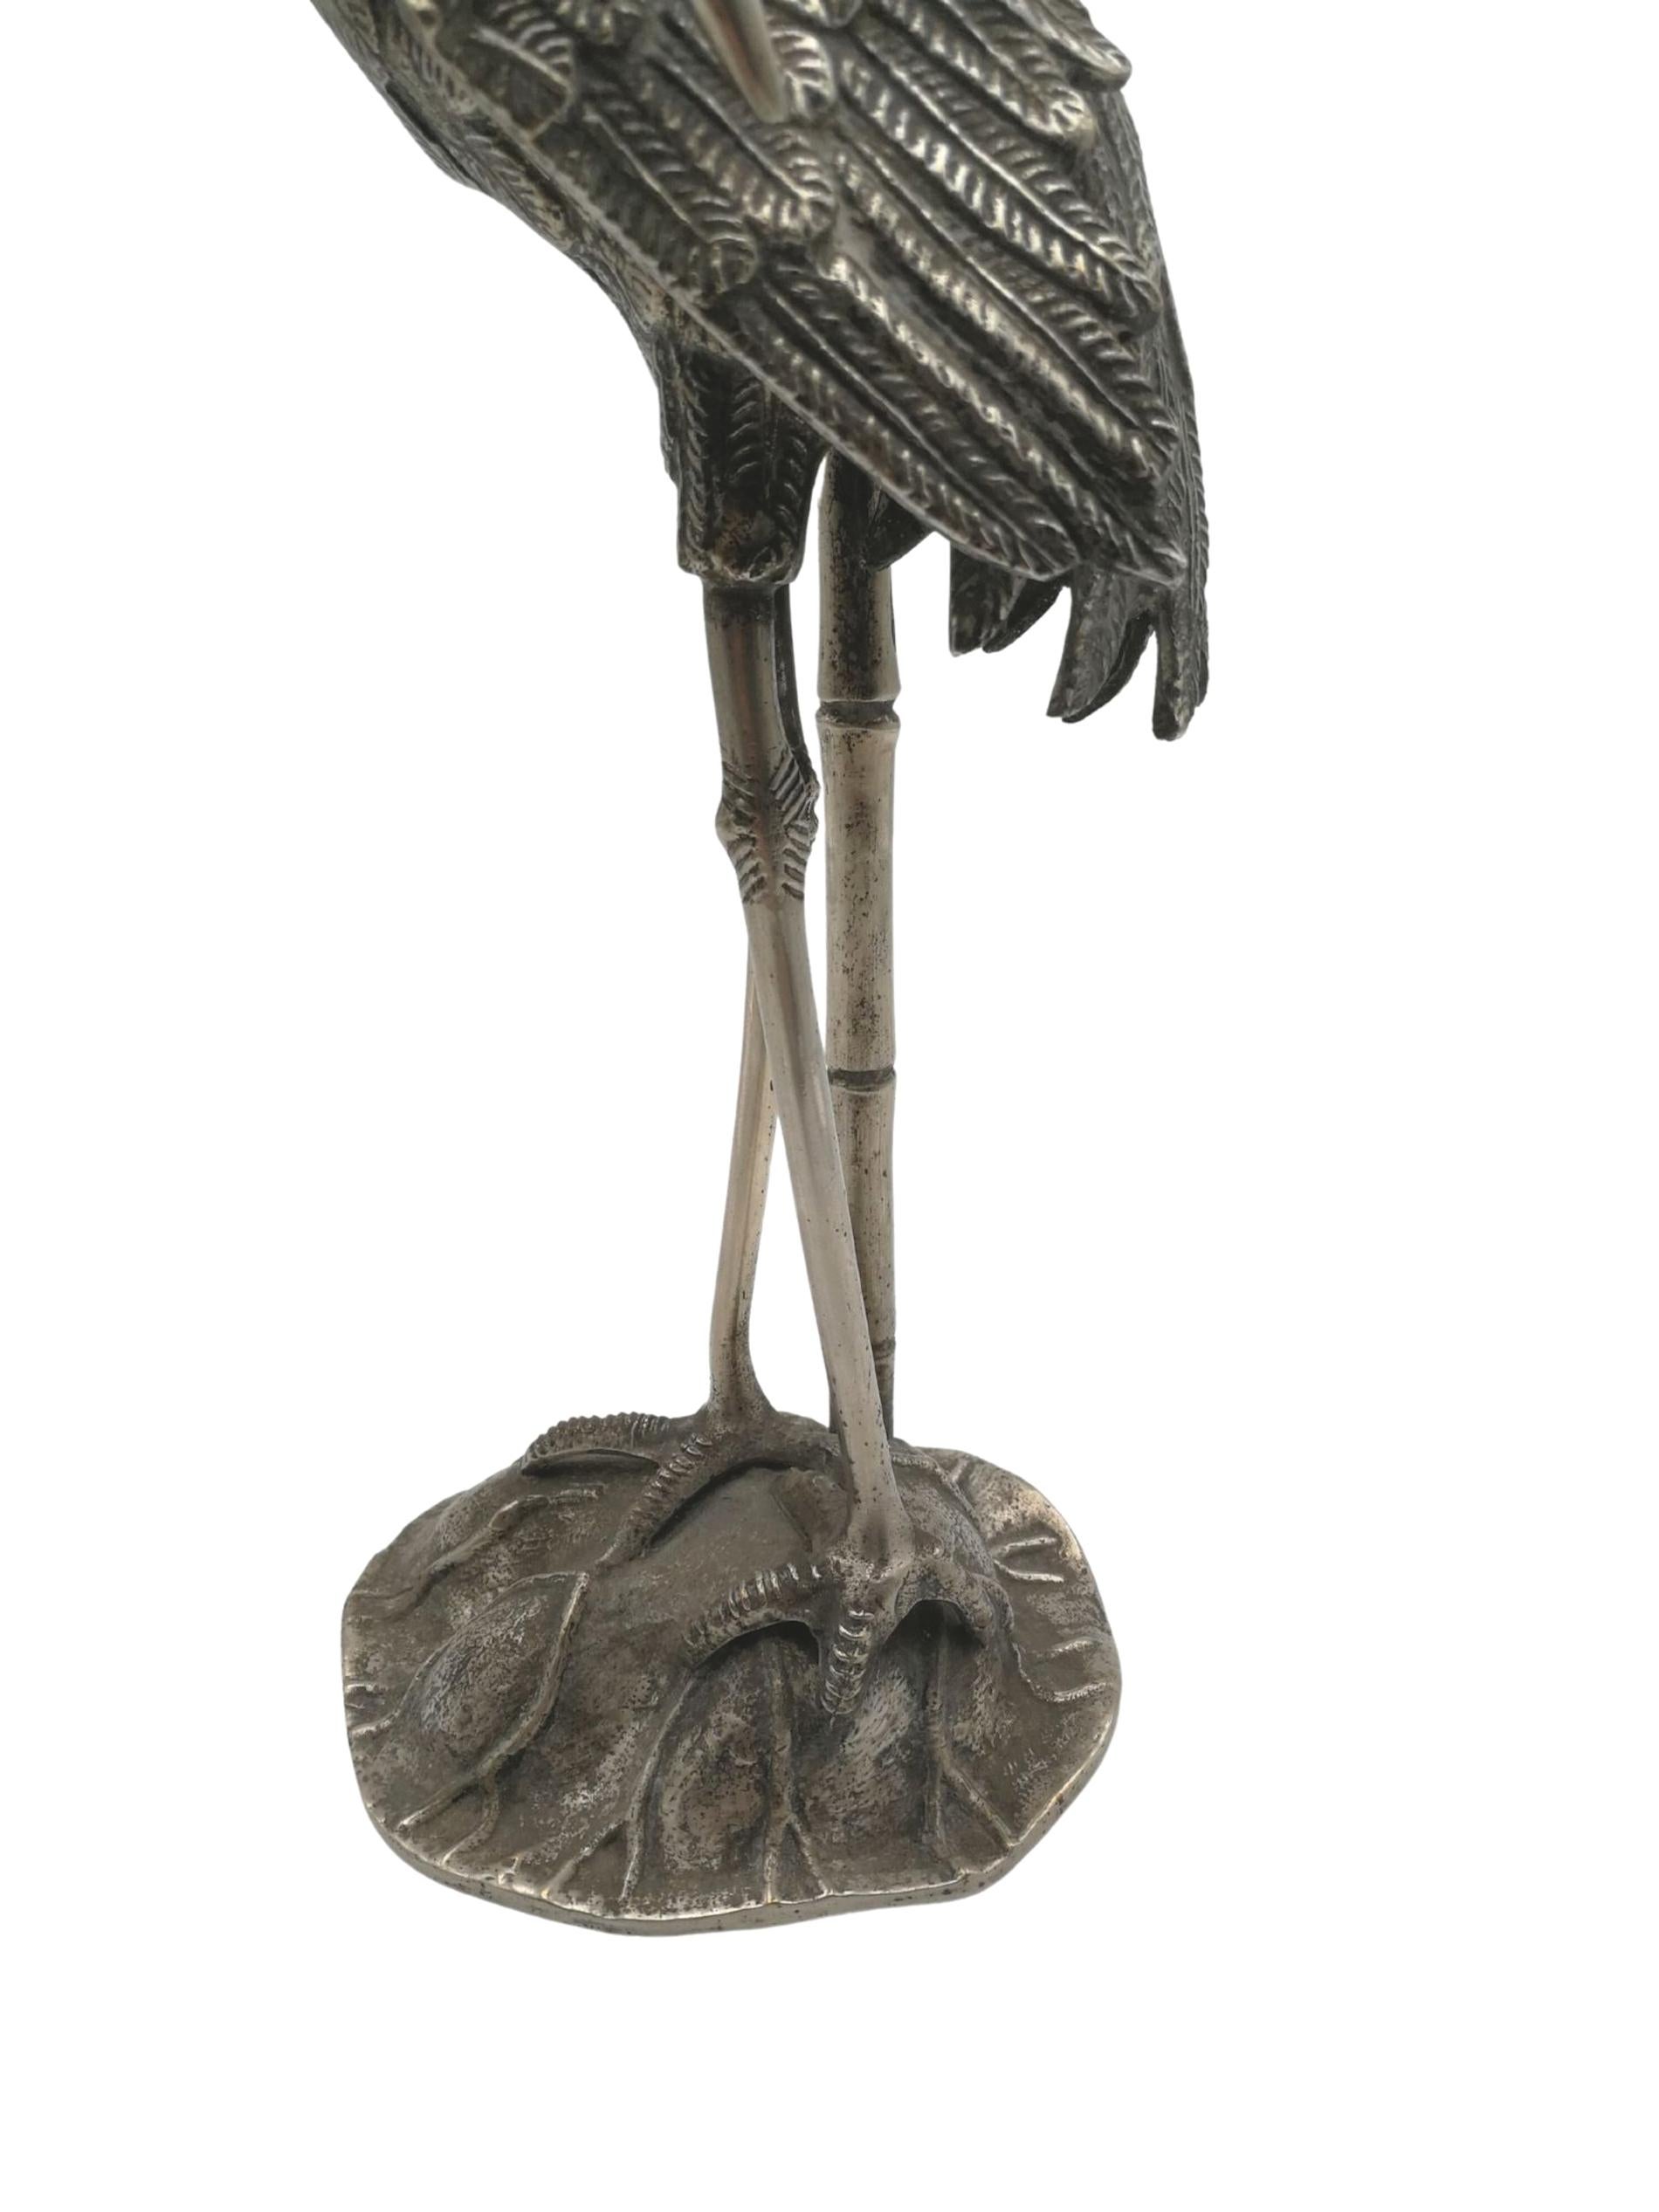 Mid-20th Century French Heron Lamp by Maison Baguès, Silver Plated Bronze, Art Deco, 1940 For Sale